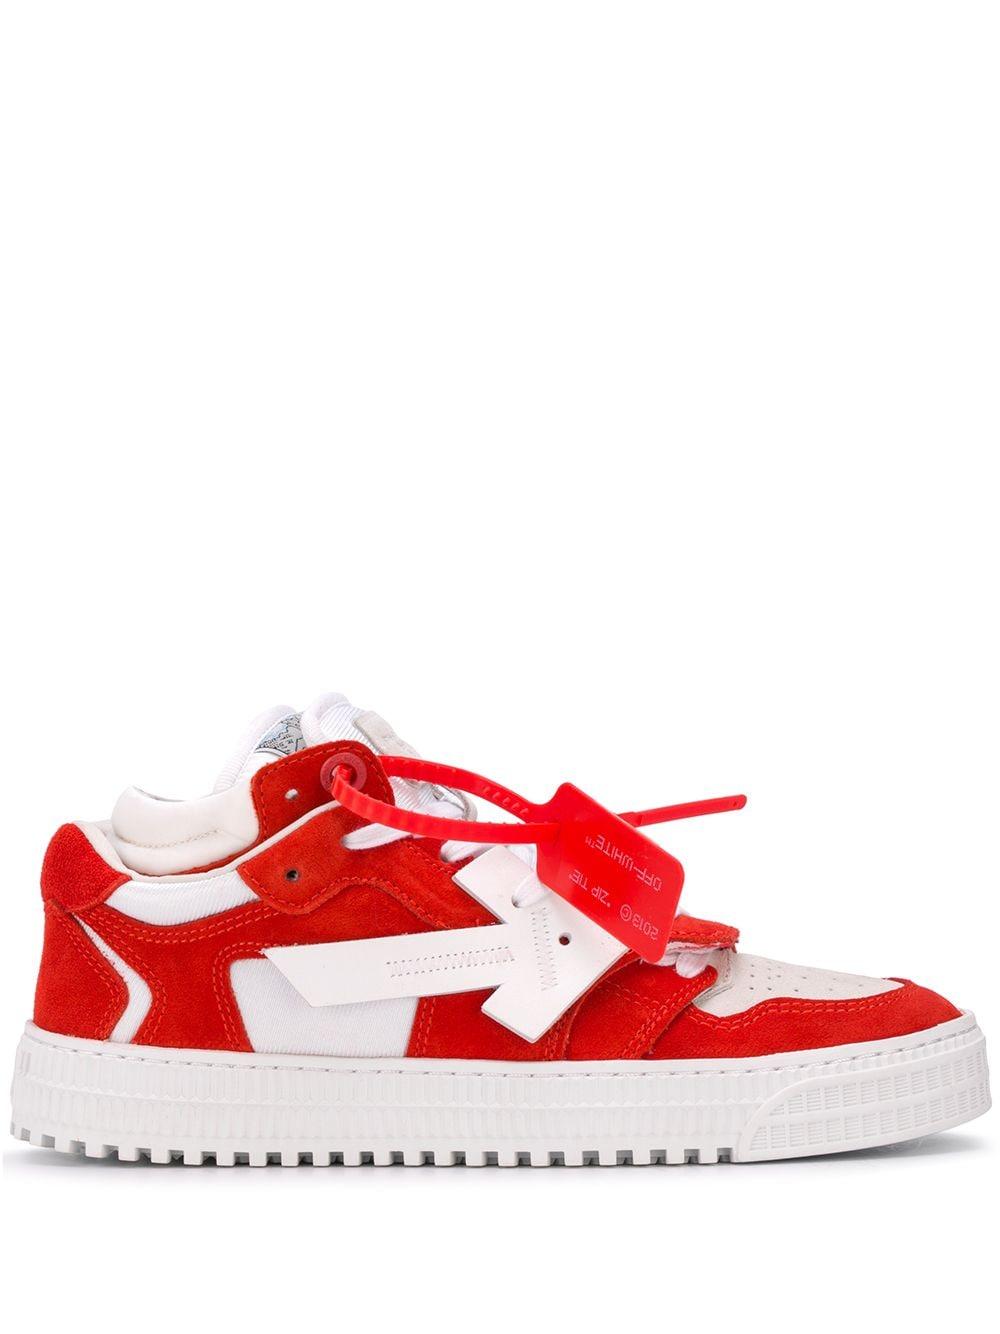 Off-White c/o Abloh Suede And White 3.0 Sneakers Lyst